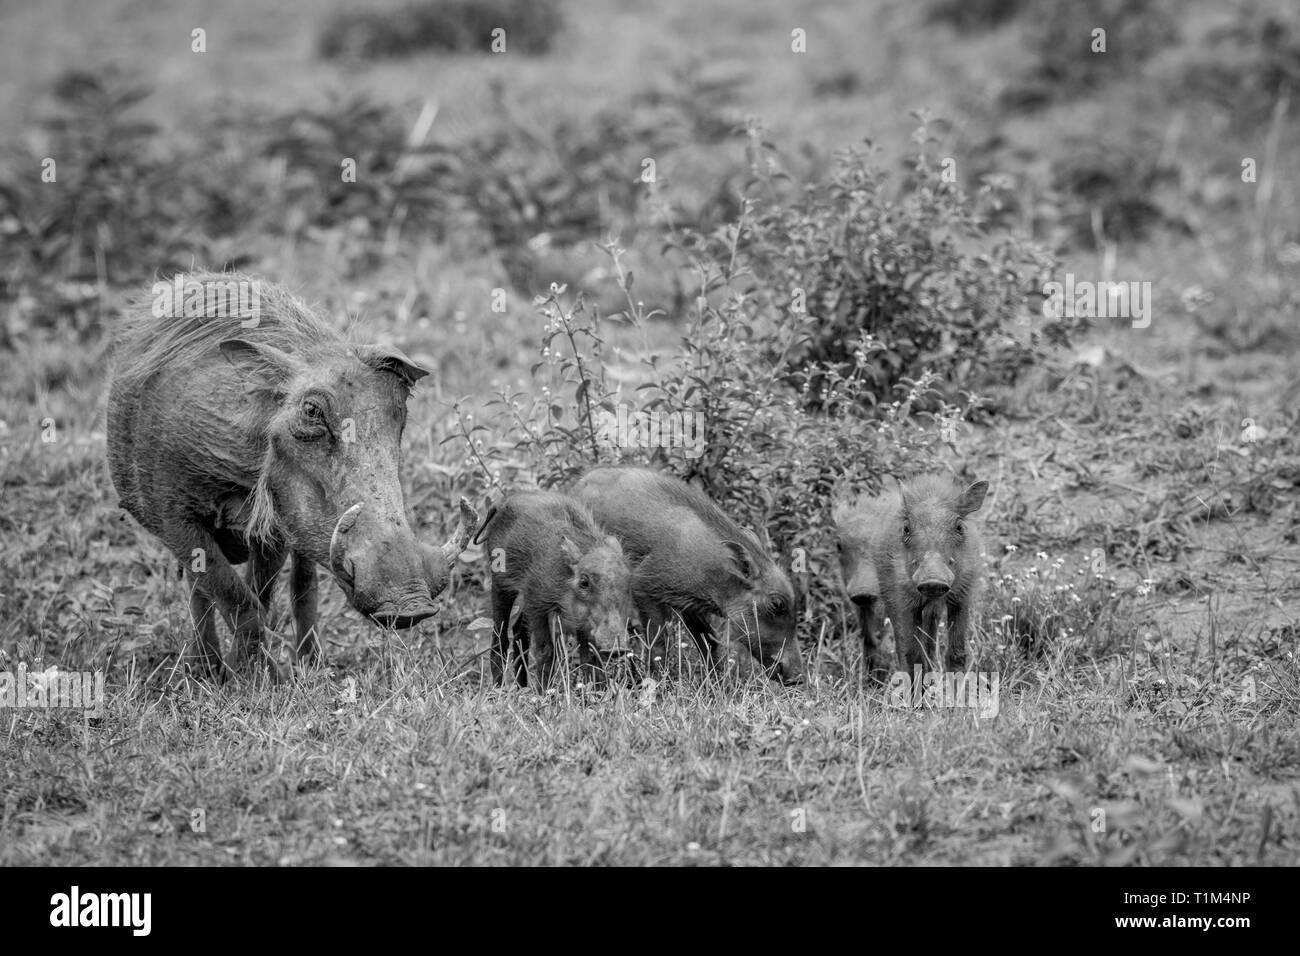 Family of Warthogs with baby piglets standing in the grass in black and white in the Welgevonden game reserve, South Africa. Stock Photo